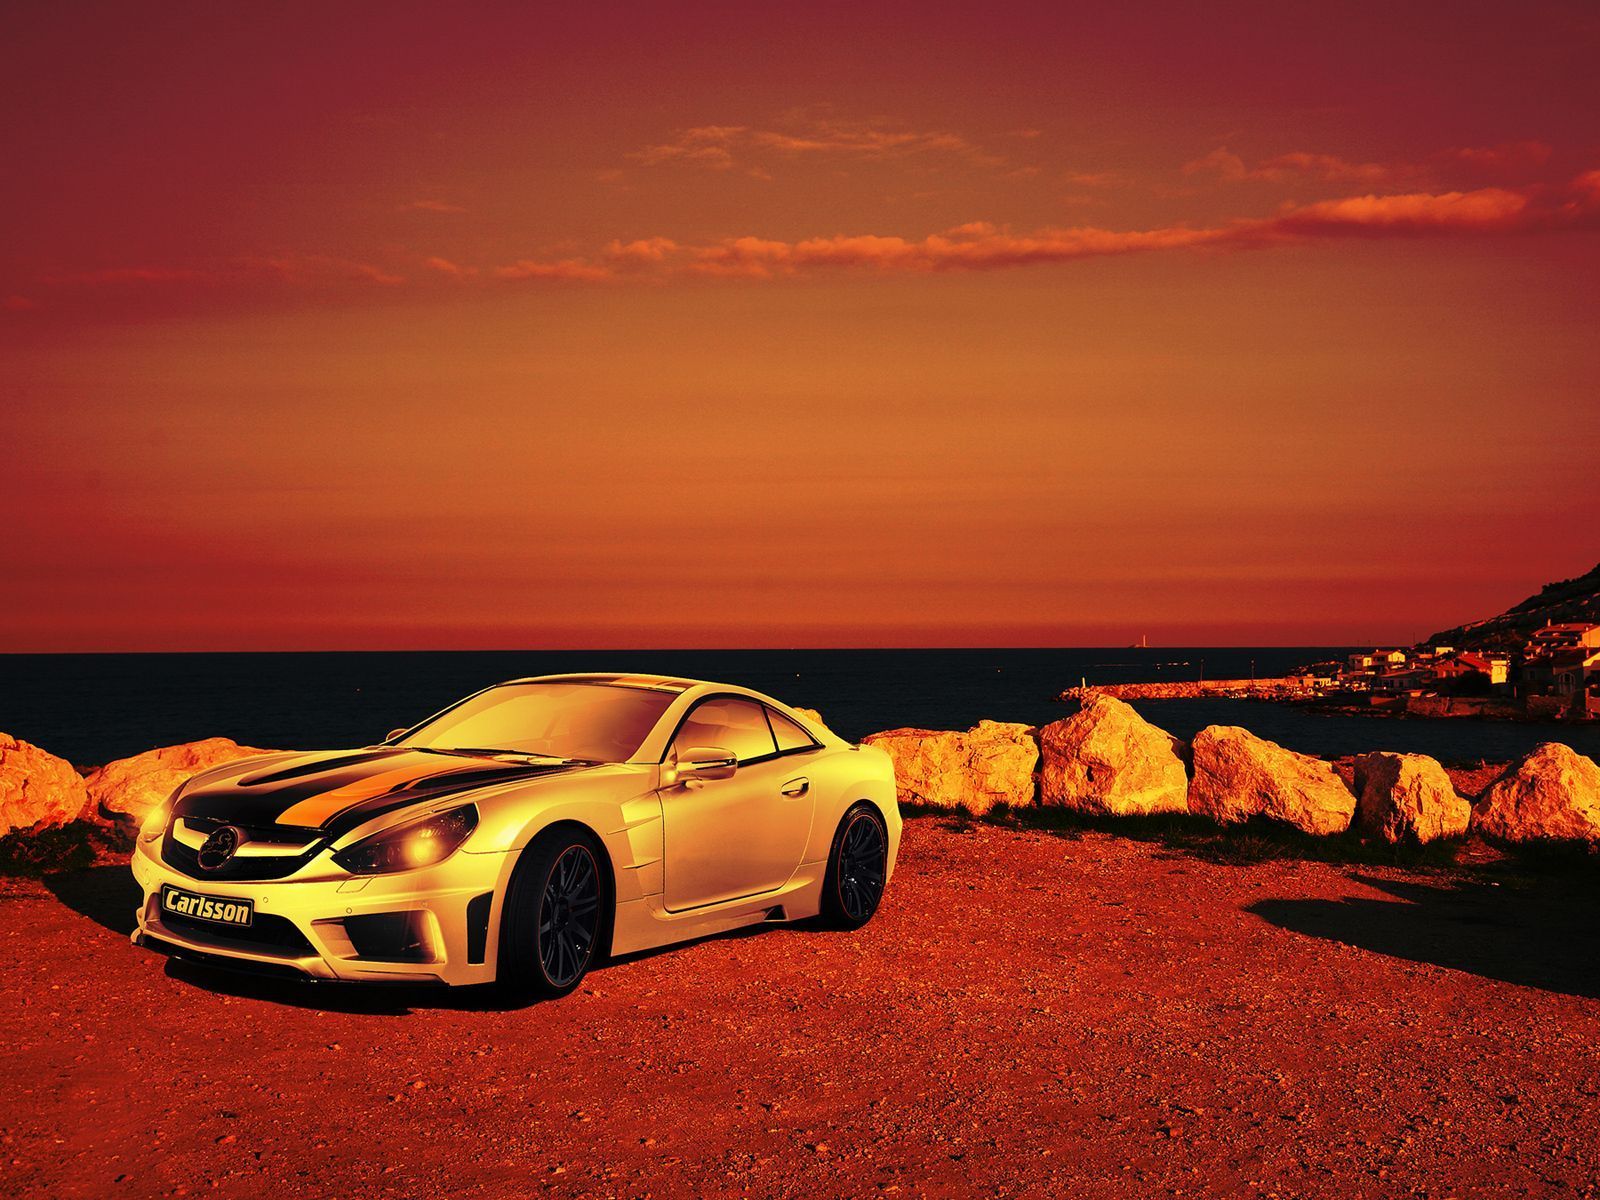 Carlsson C25 Exotic wallpapers | Carlsson C25 Exotic stock photos